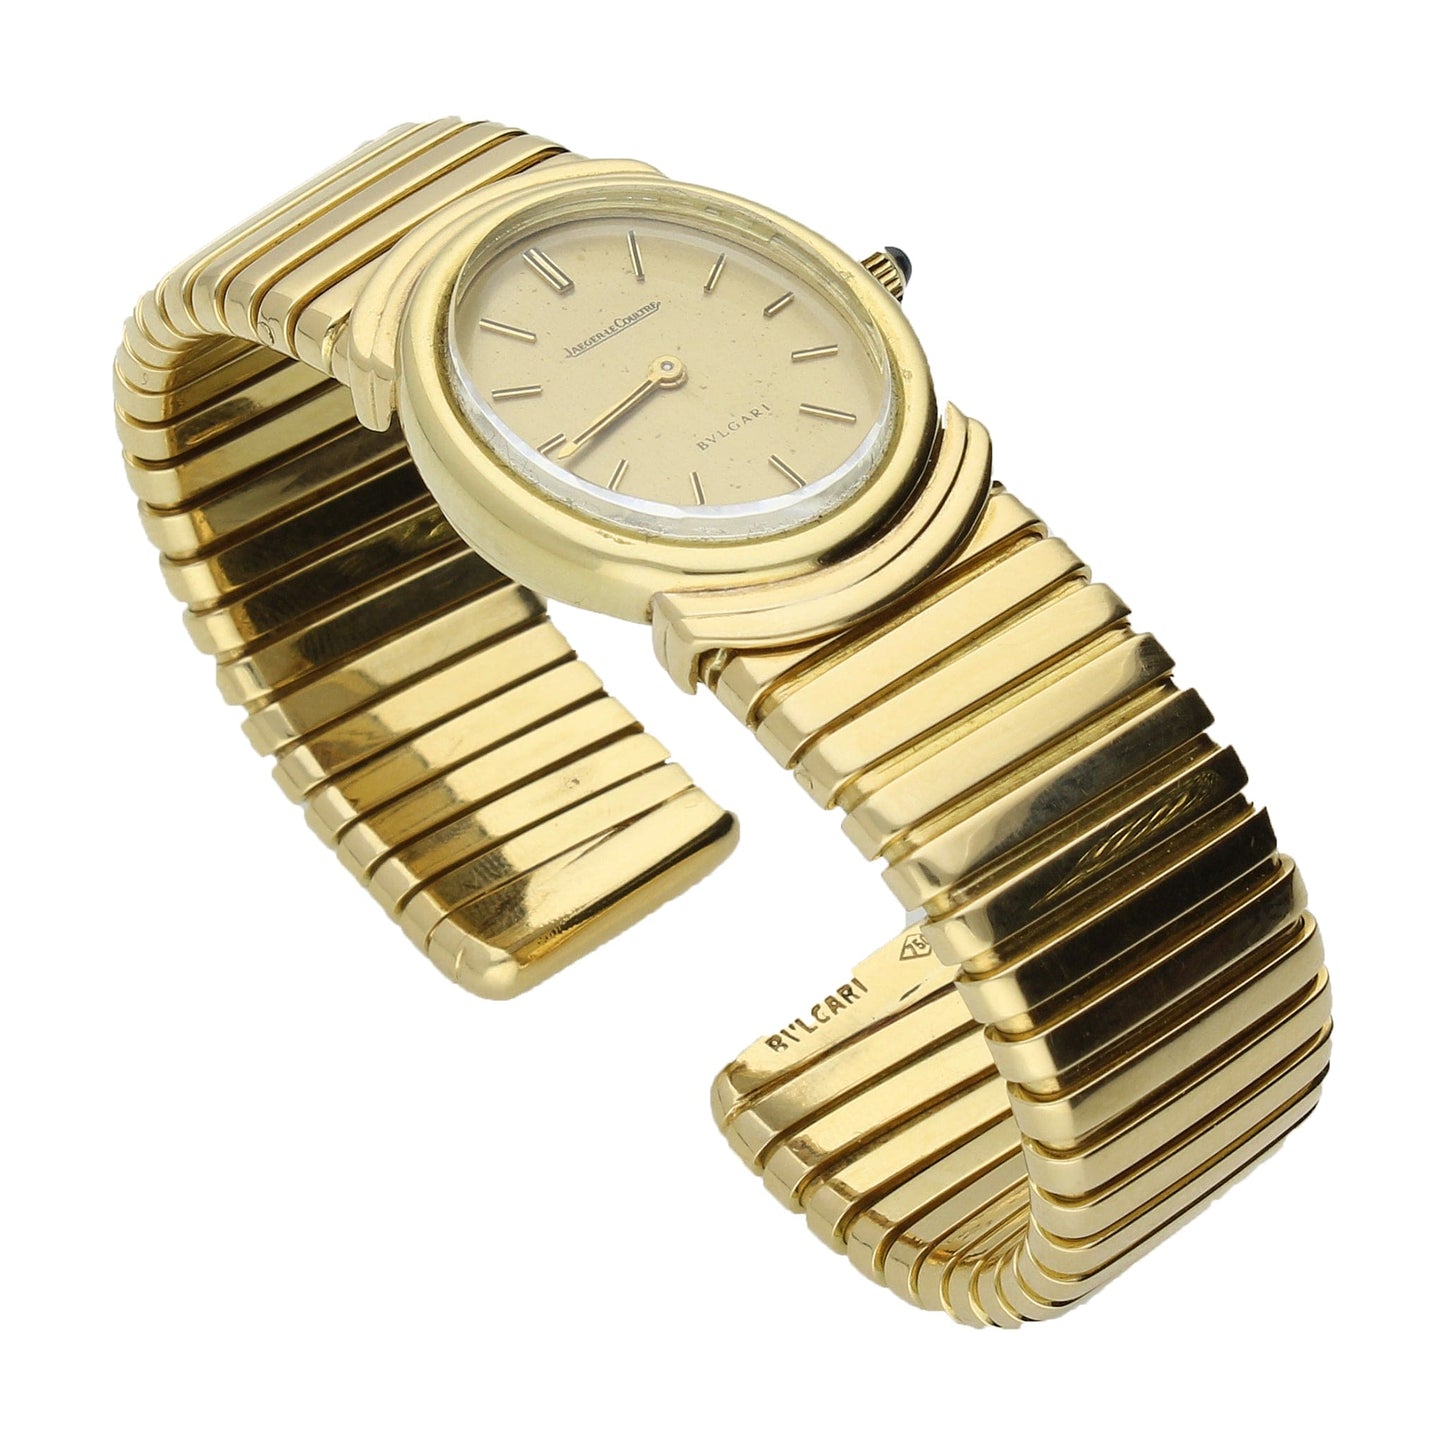 18ct yellow gold 'Tubogas Serpenti ' bracelet watch, retailed by BVLGARI.  Made 1950's